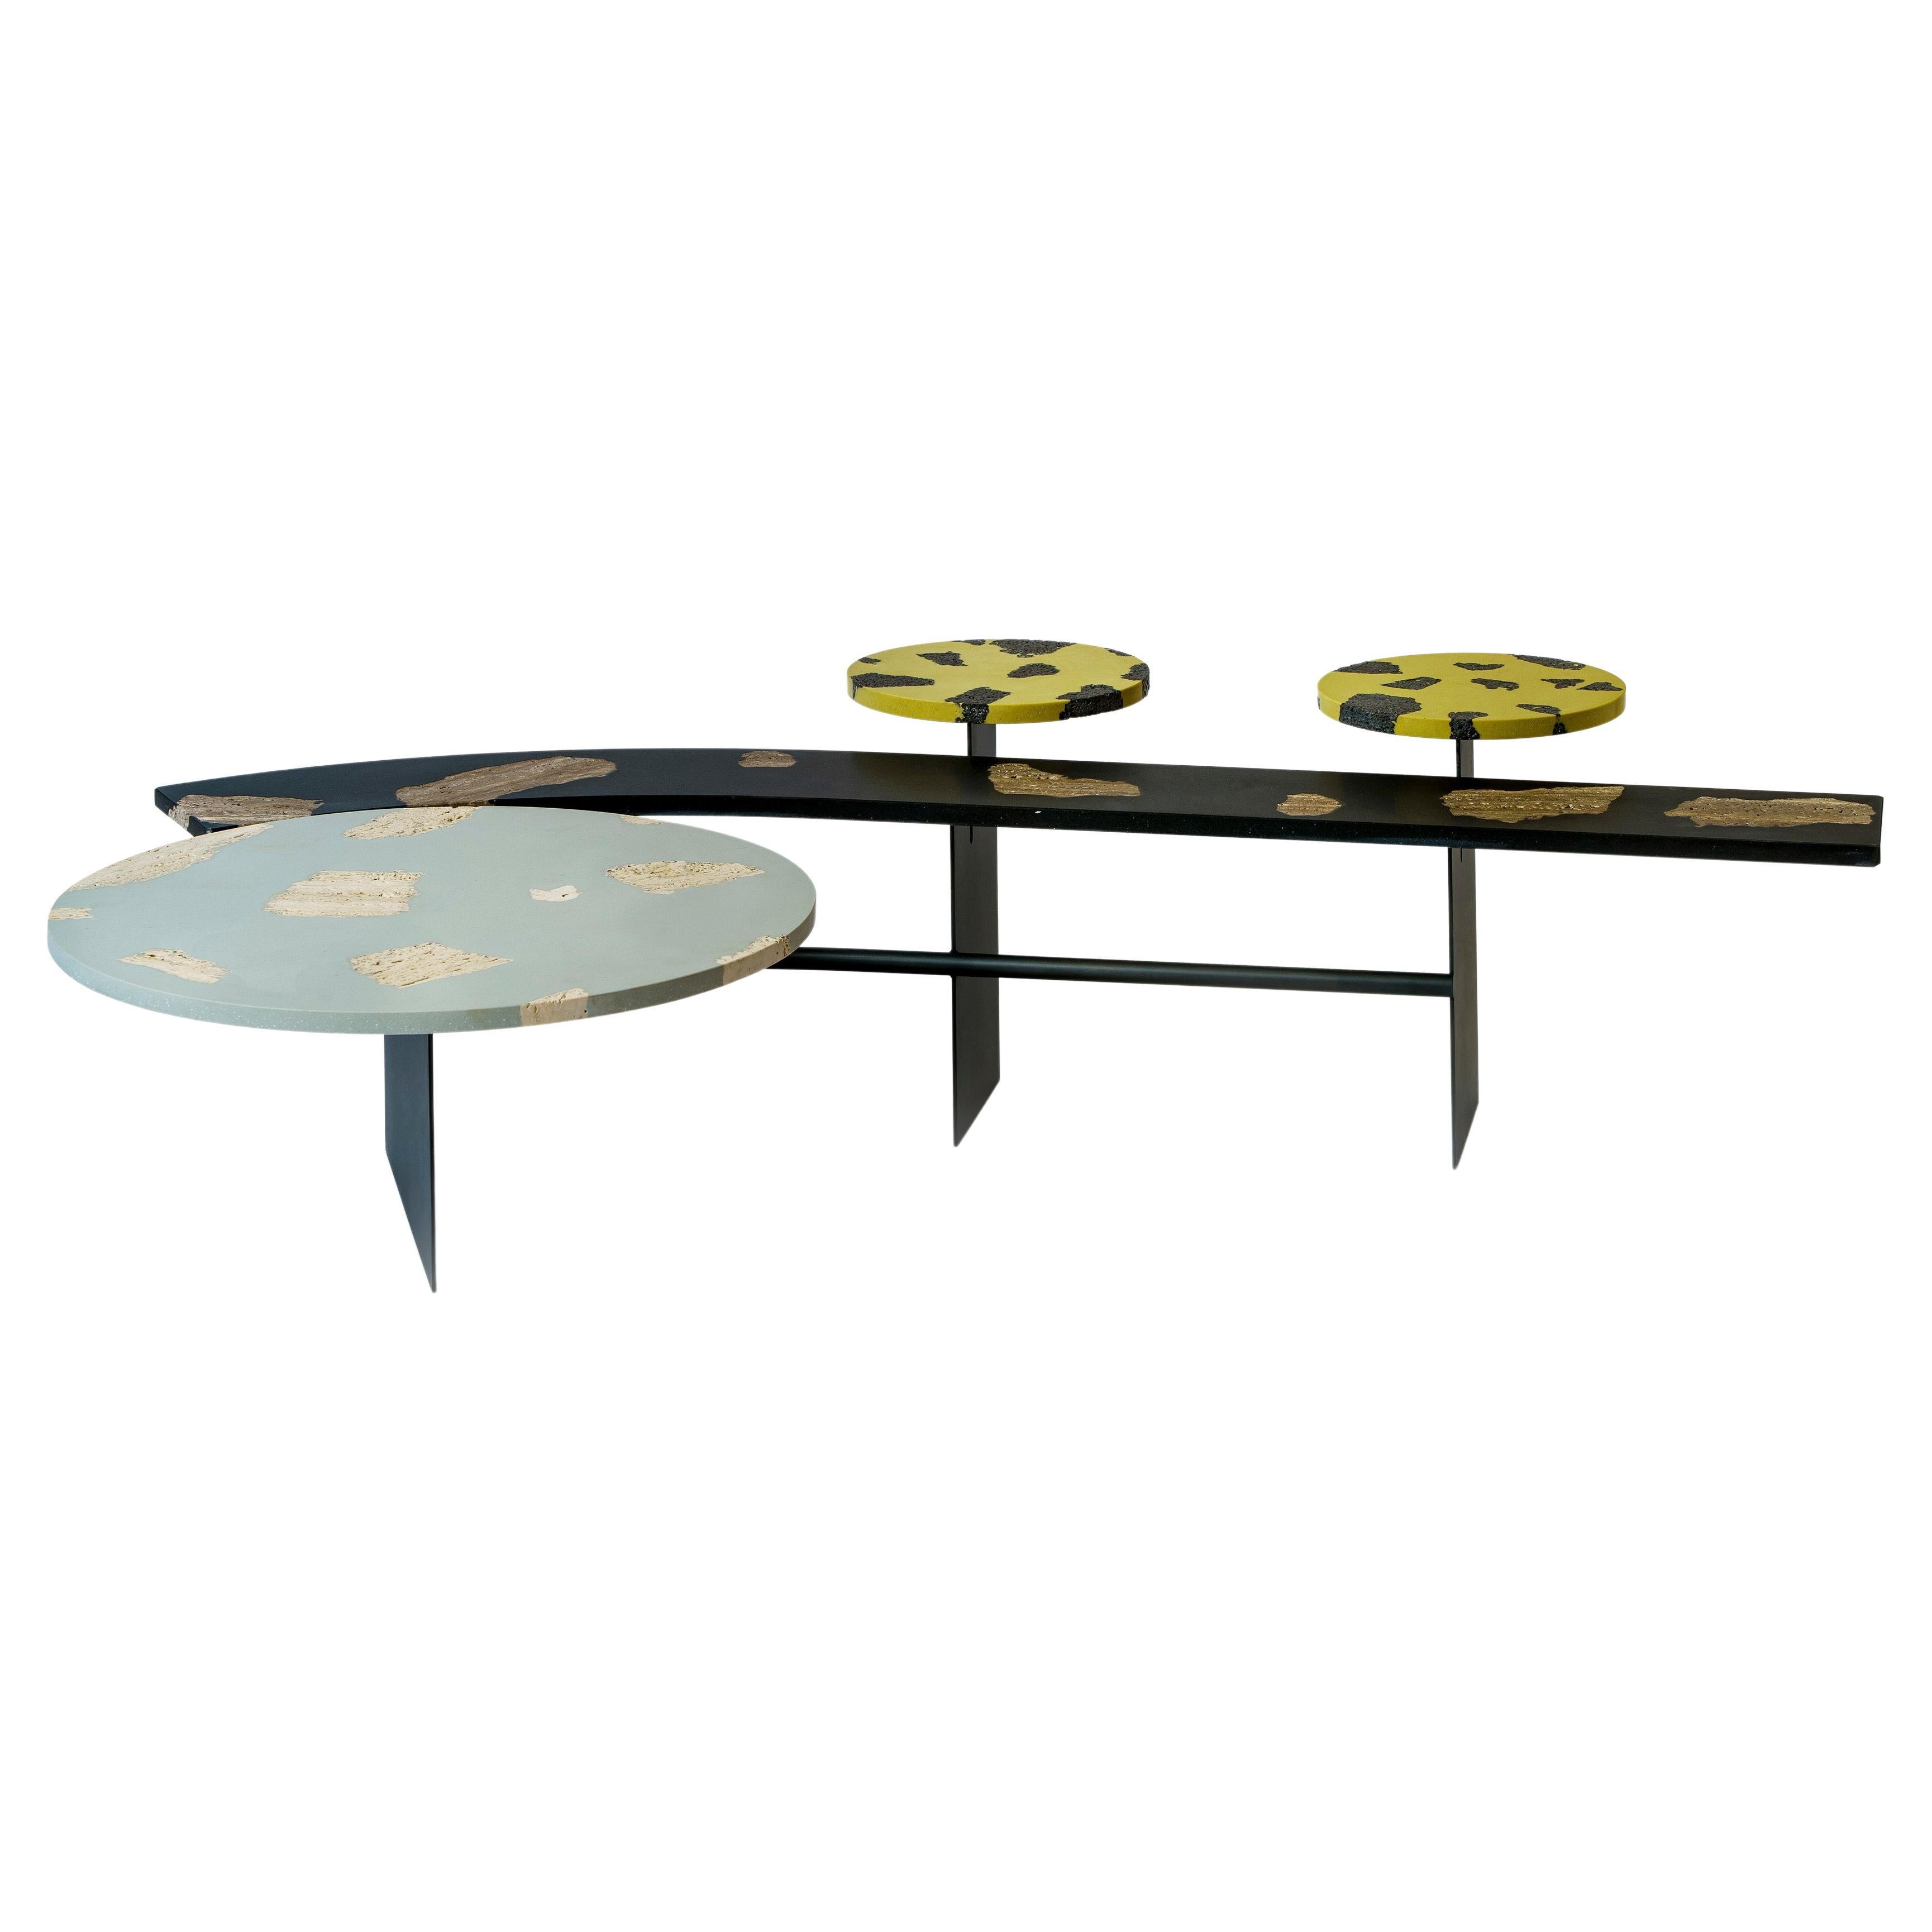 Mimante Coffee Table 1 by Andrea Steidl for Delvis Unlimited Yellow, Black, Gray For Sale